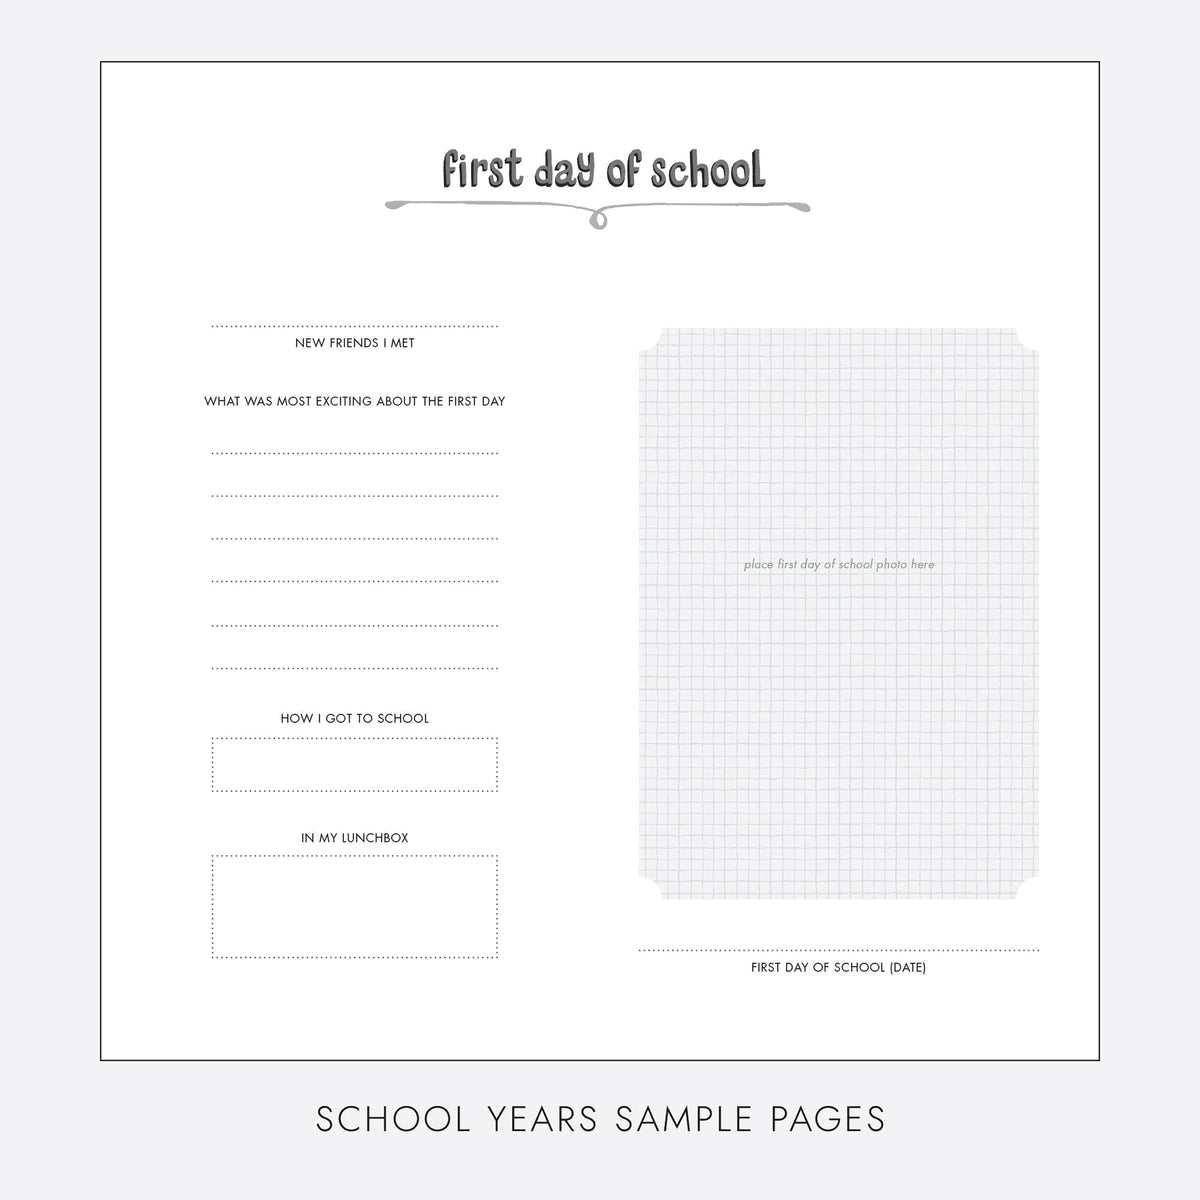 School Years with Mango Cotton Cover